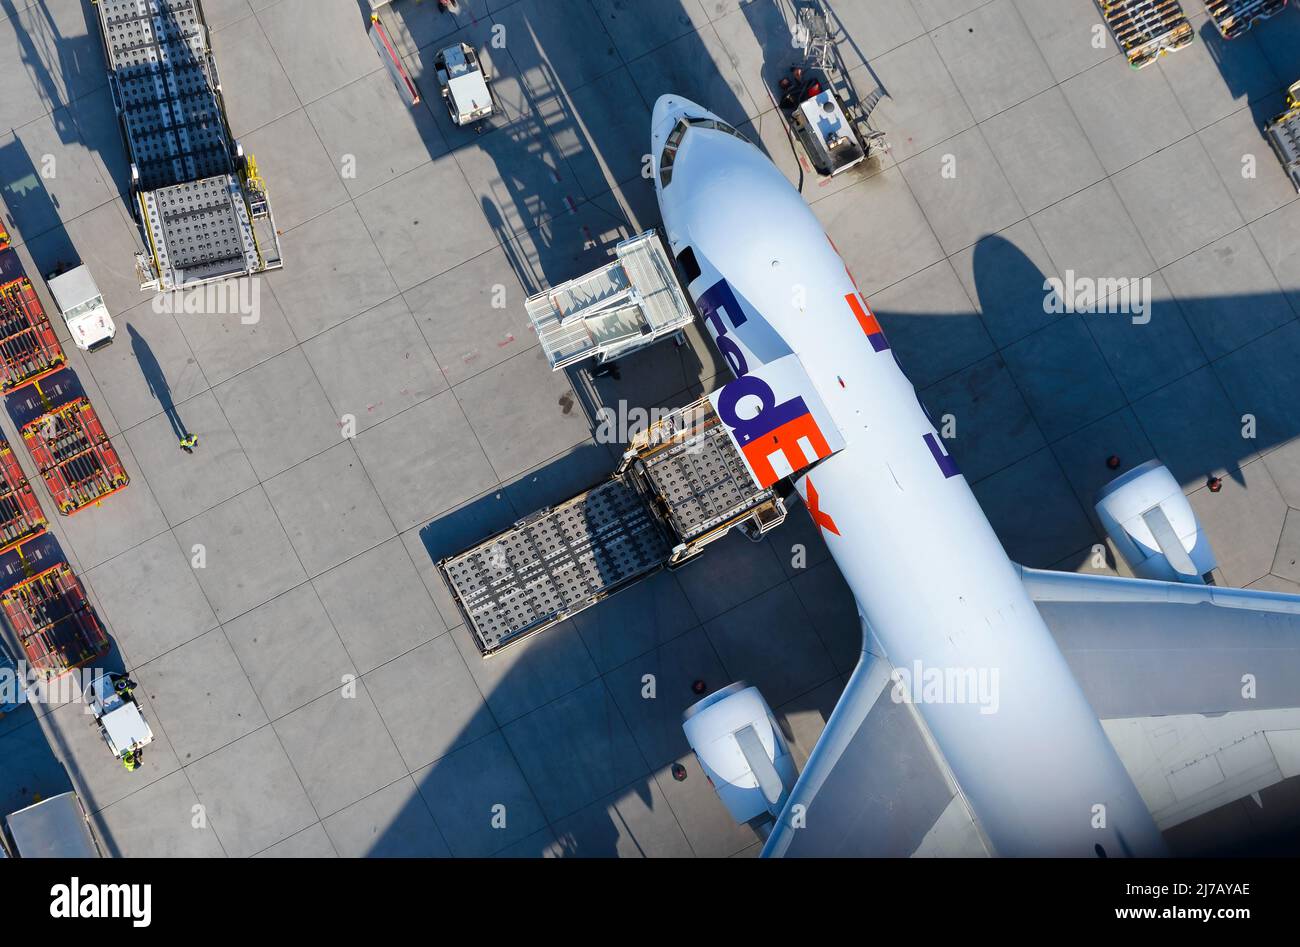 FedEx Boeing 767 aircraft being loaded with cargo. Freighter airplane of Fedex Express with cargo door open seen from above. Air cargo plane. Stock Photo